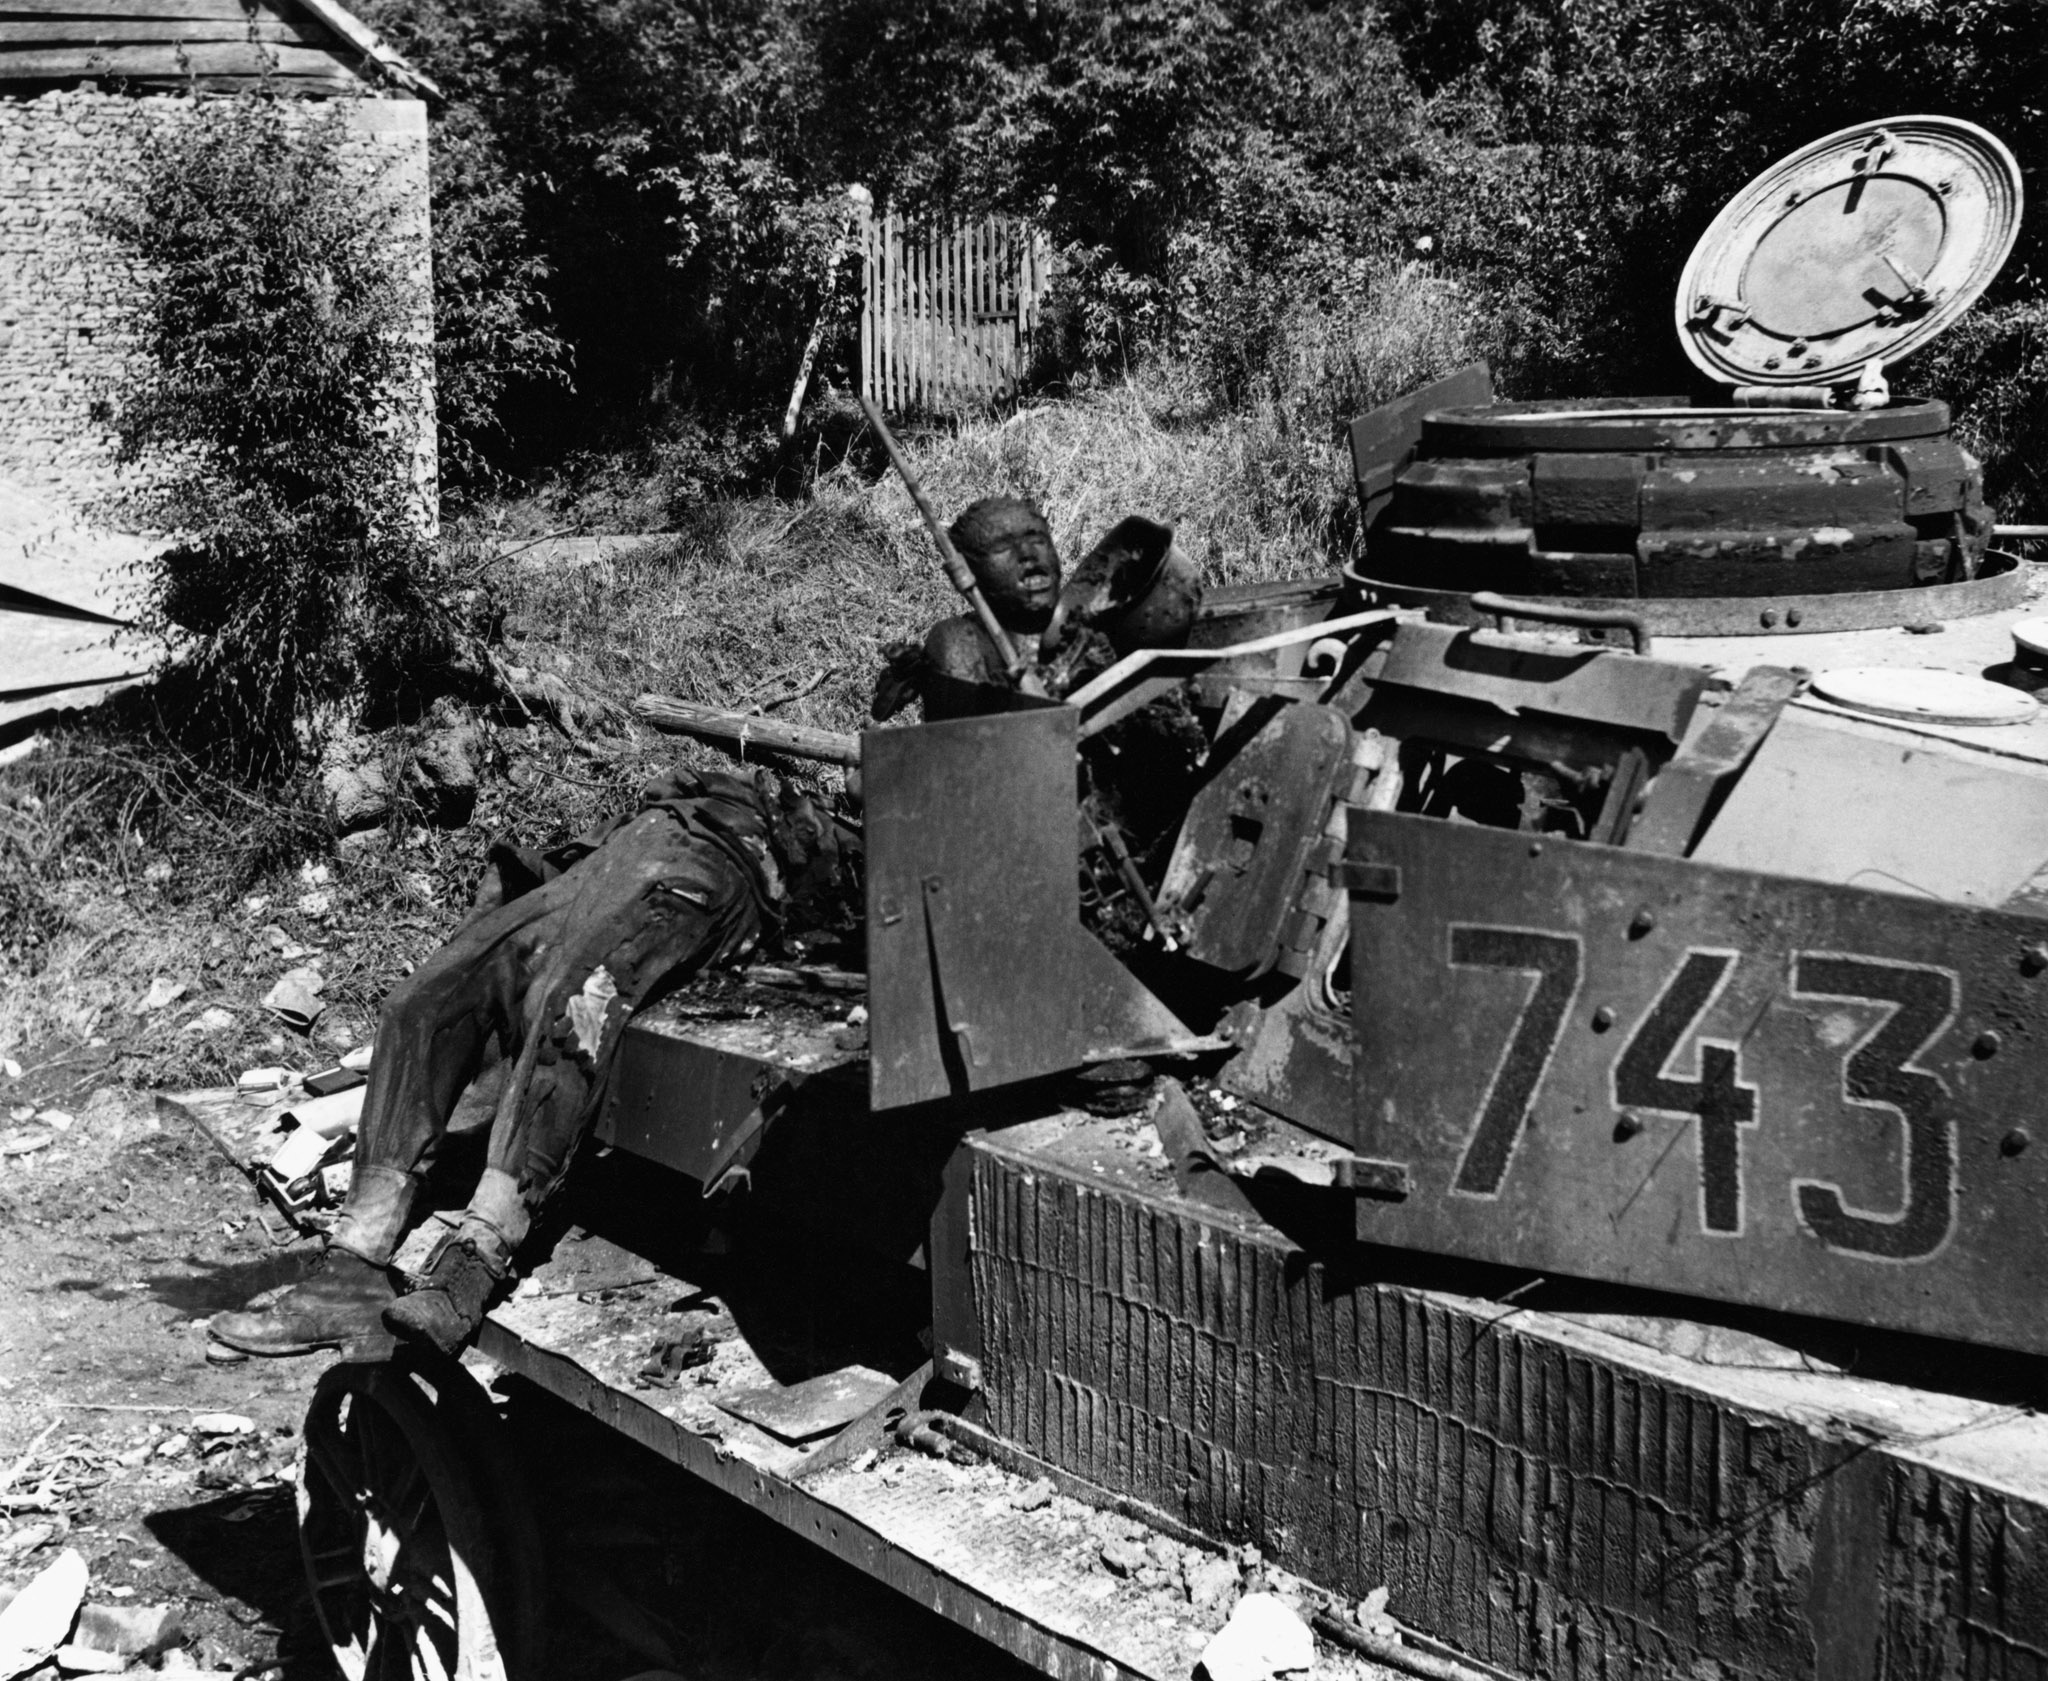 Dead soldiers sprawled on a tank in northwest Europe, circa 1944.